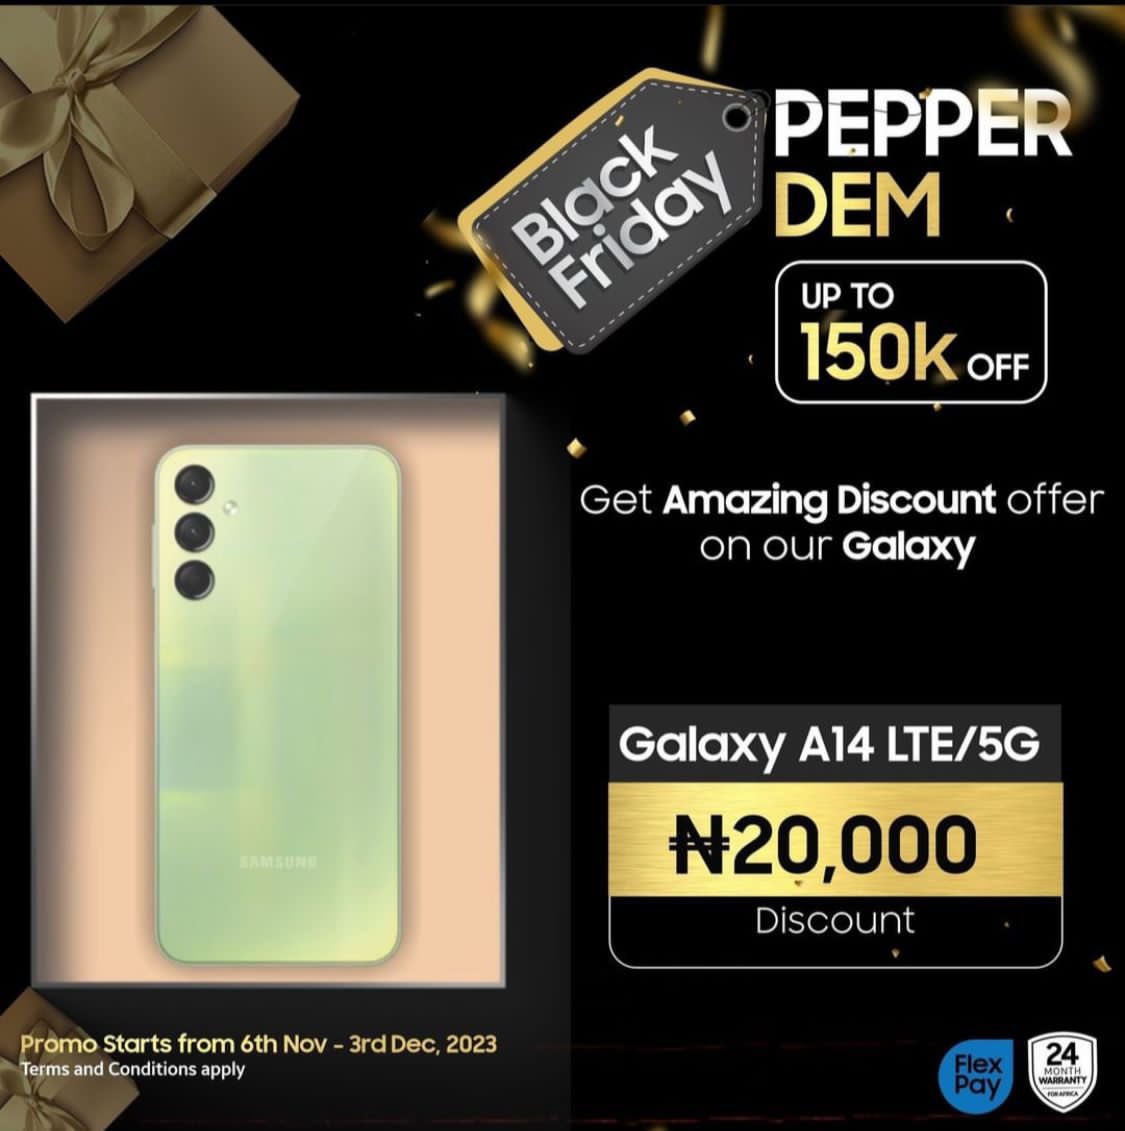 The #GalaxyA14 is going for a whopping N20,000 off the this #SamsungBlackFriday. Seize the opportunity and get yourself one with the amazing discount!!!